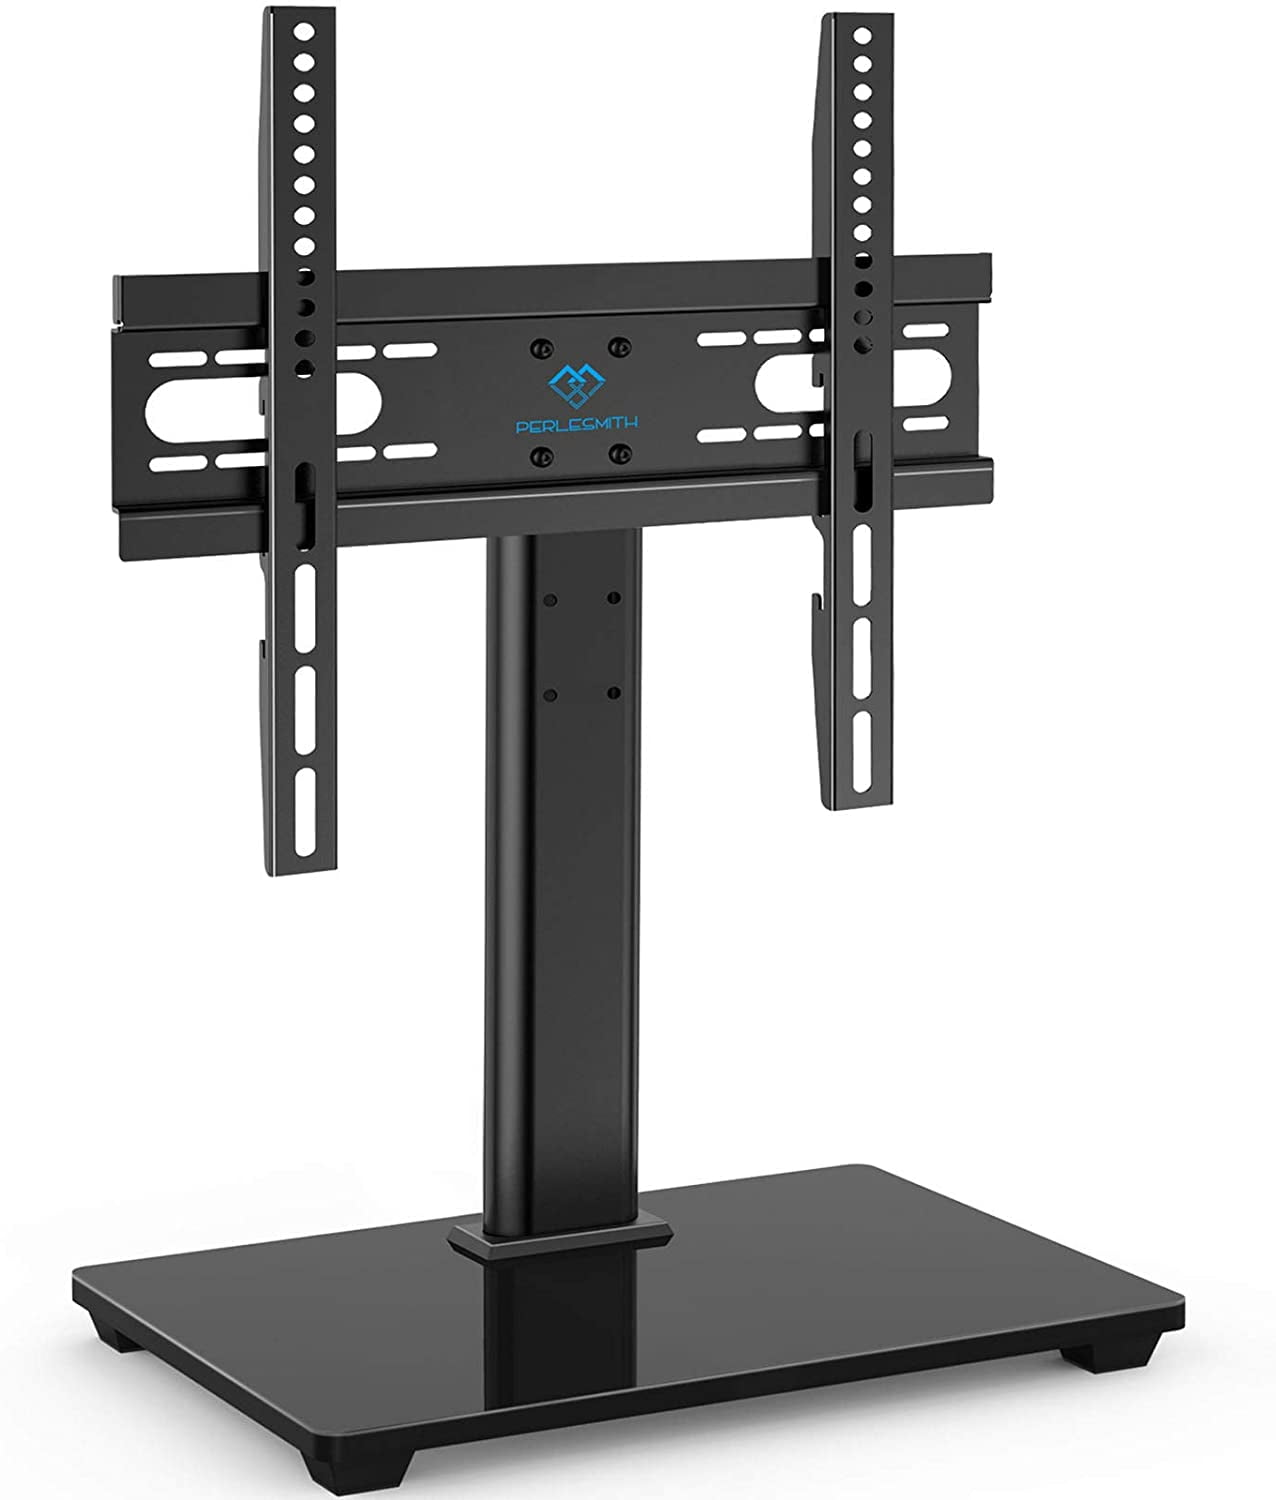 37"-55" Universal Table Top TV Stand Base Bracket Mount For Flat-Screen LED LCD 